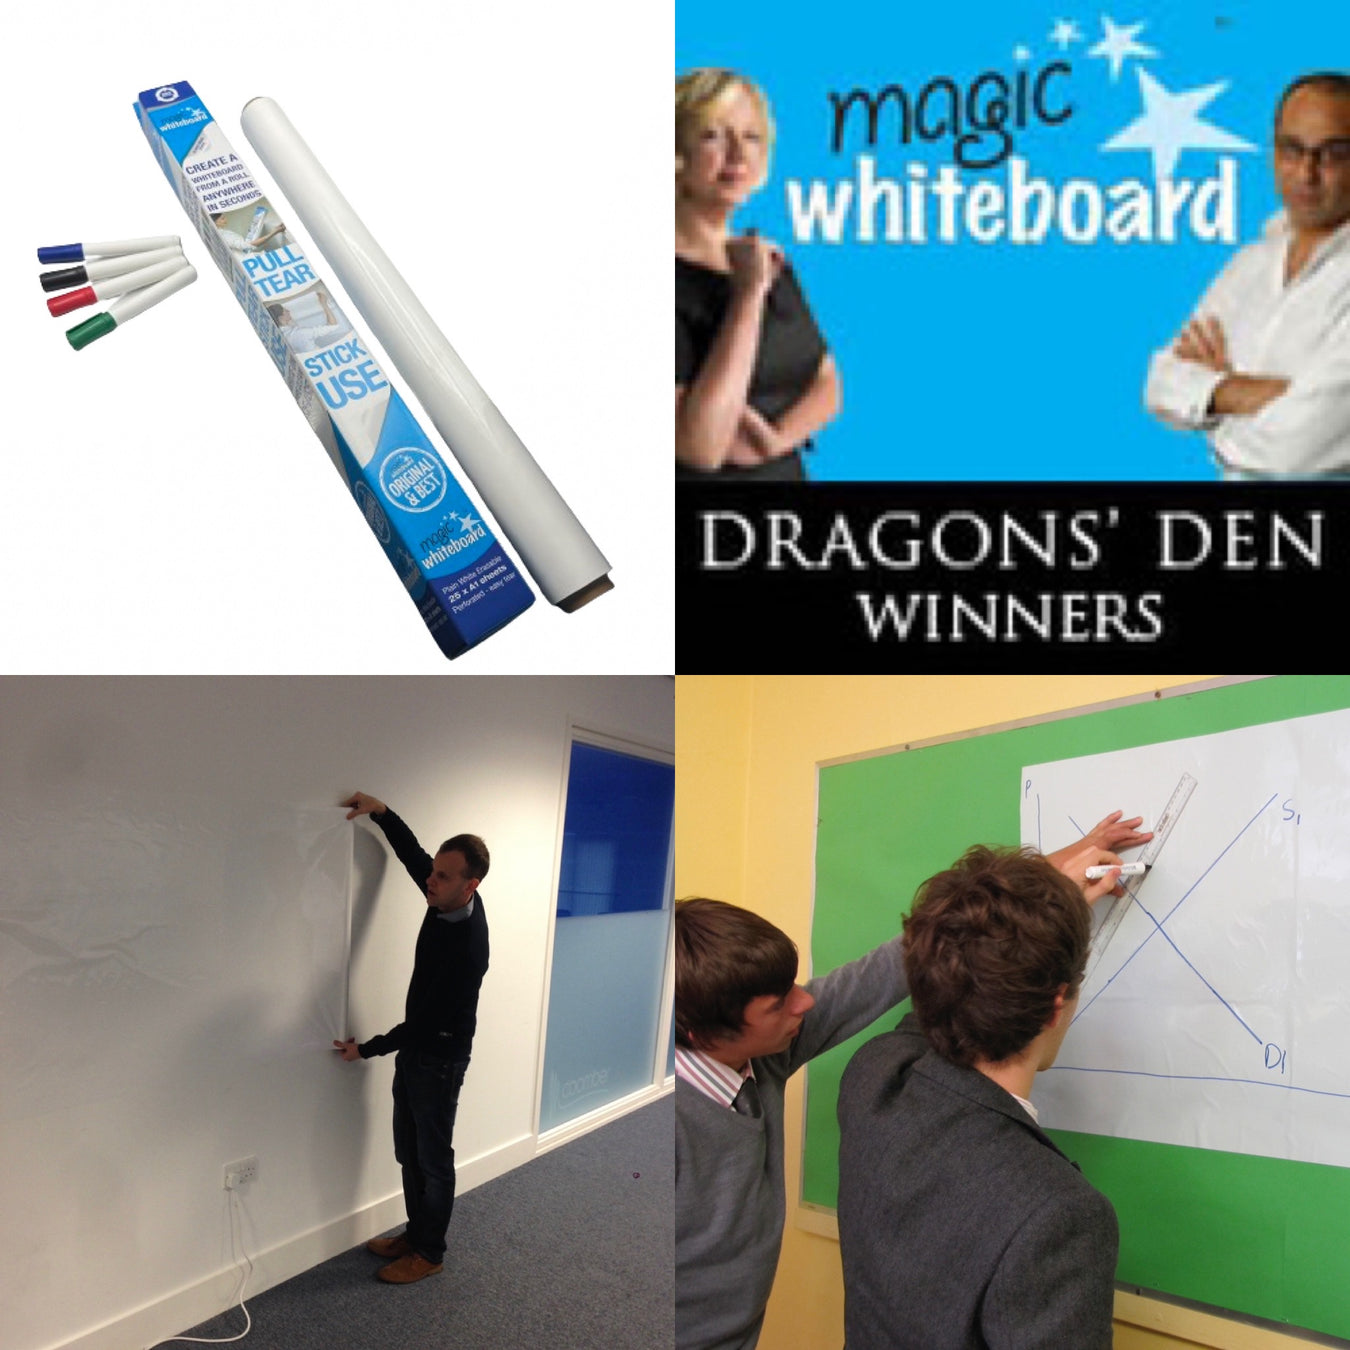 Best Sellers - All Our Best Selling Whiteboards